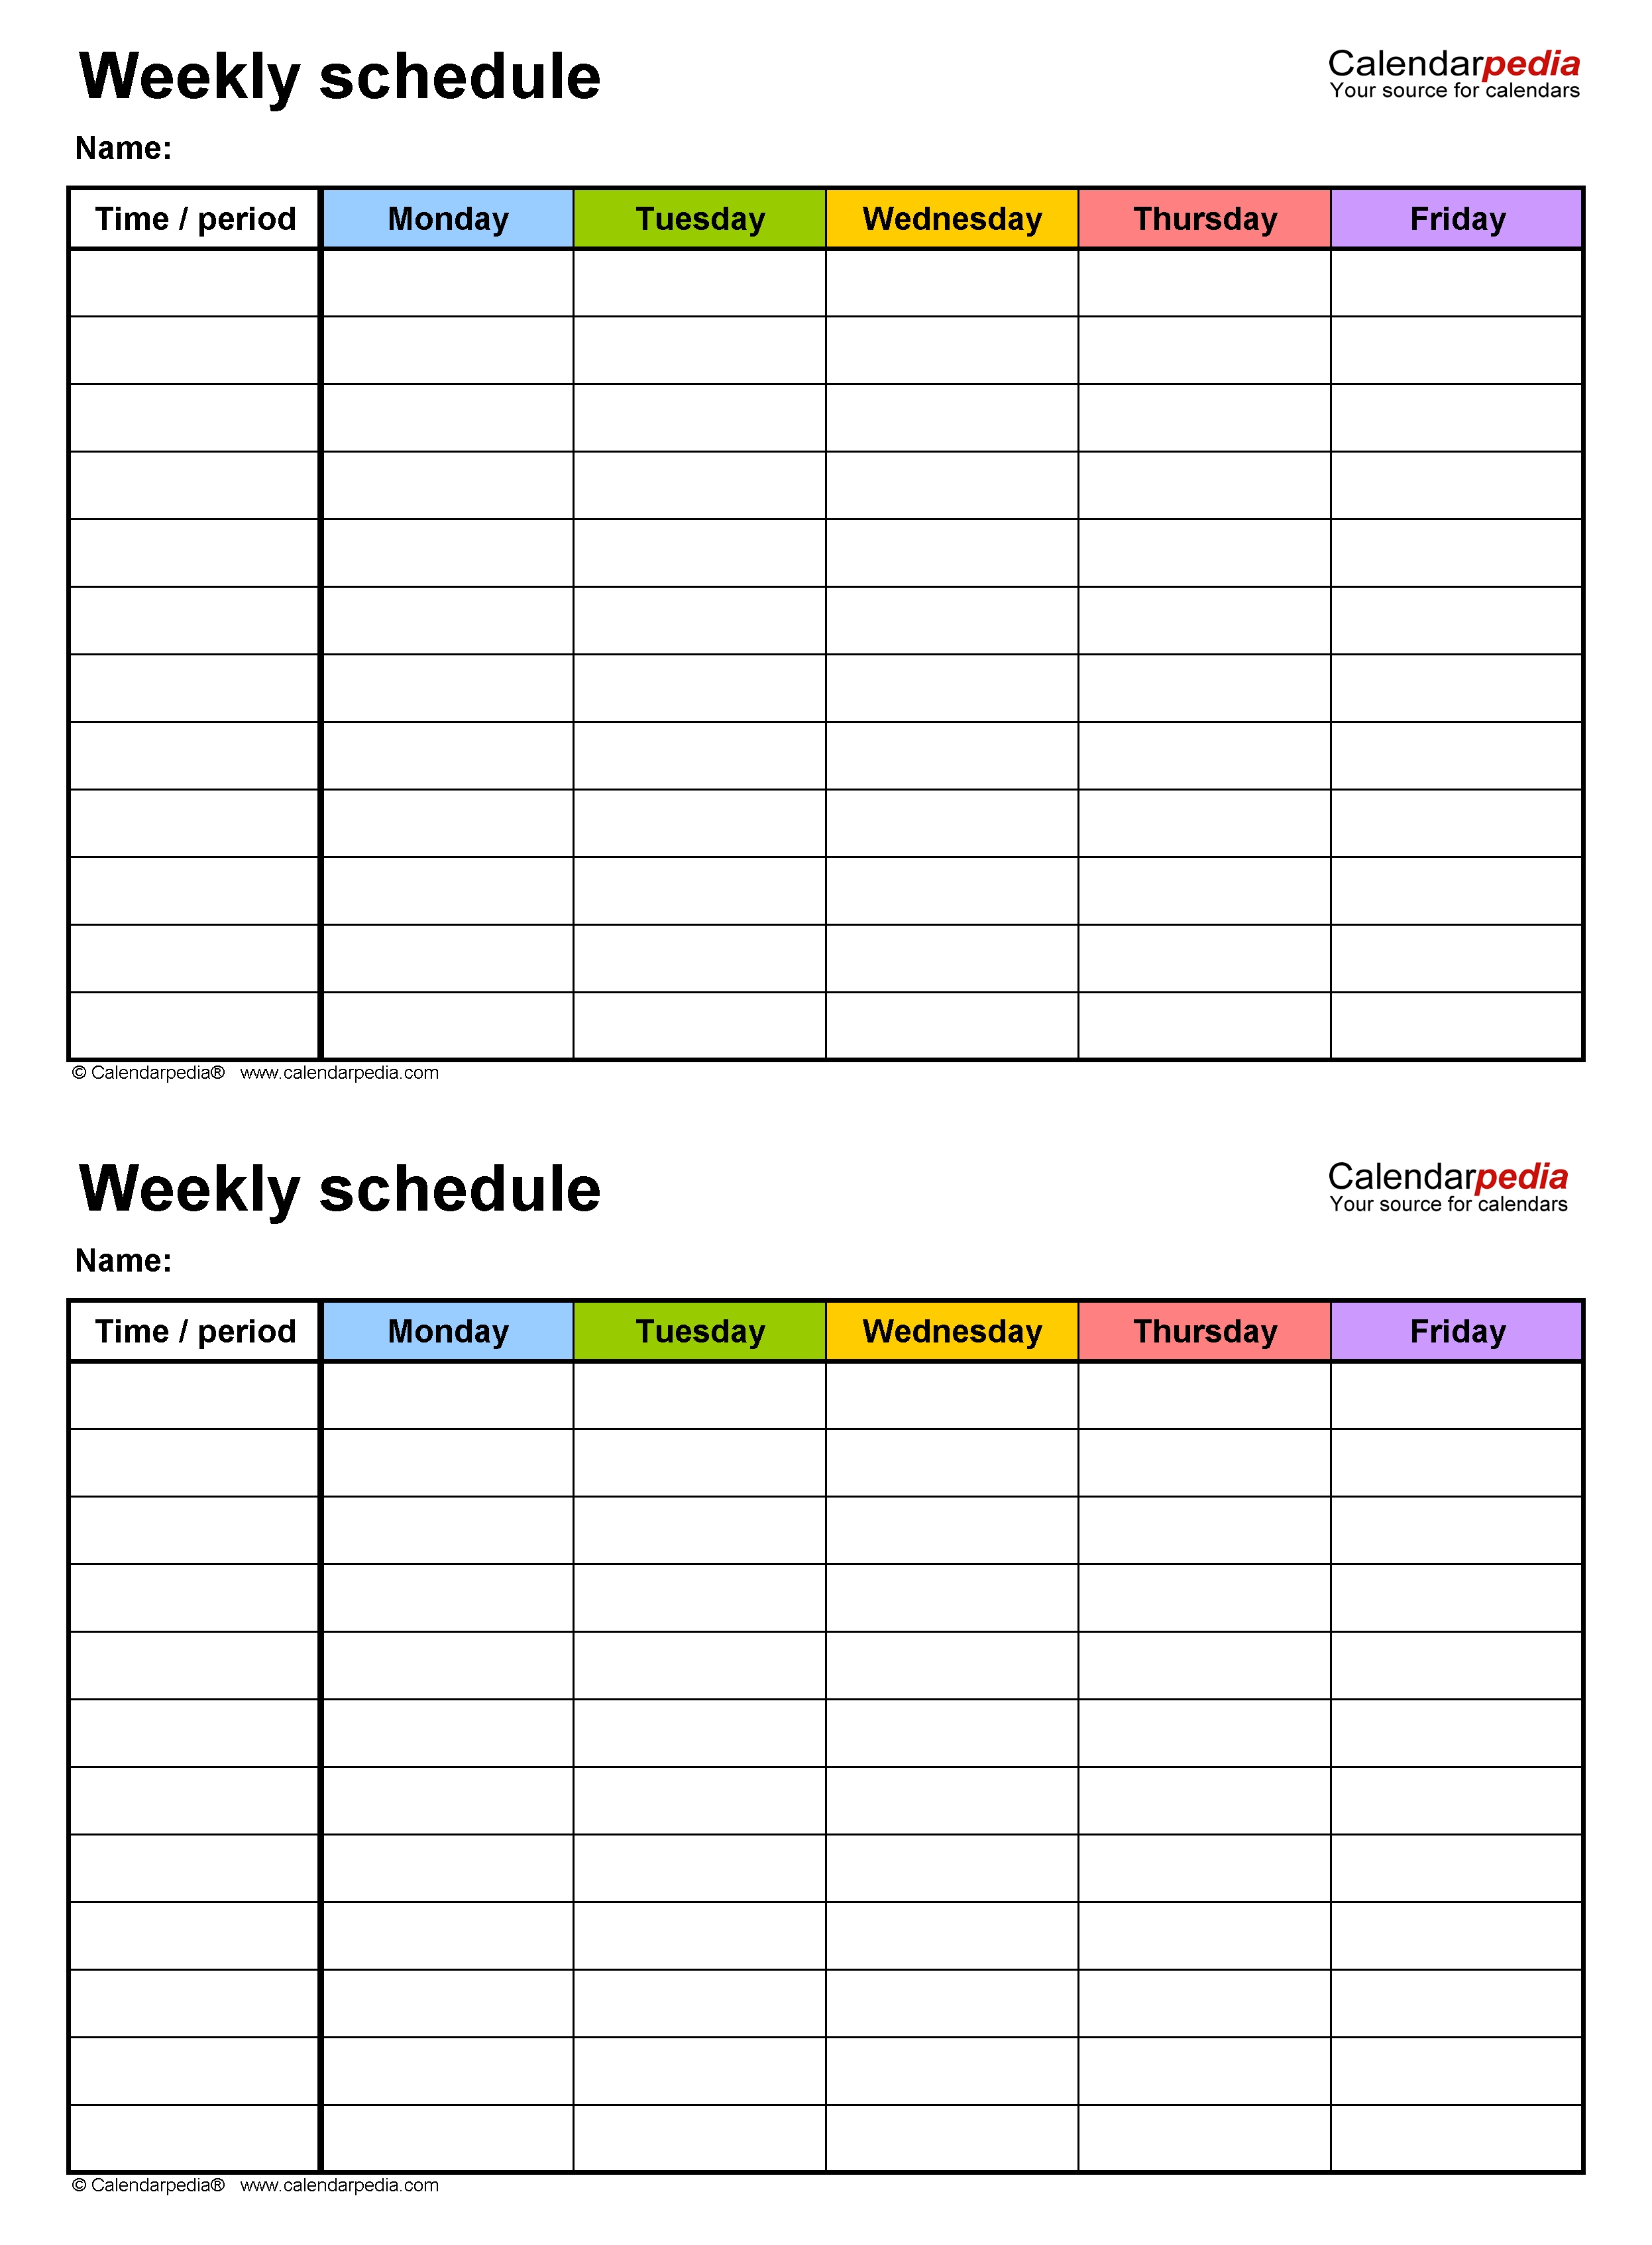 Free Weekly Schedule Templates For Excel - 18 Templates  Business Monday To Friday Daily Planner